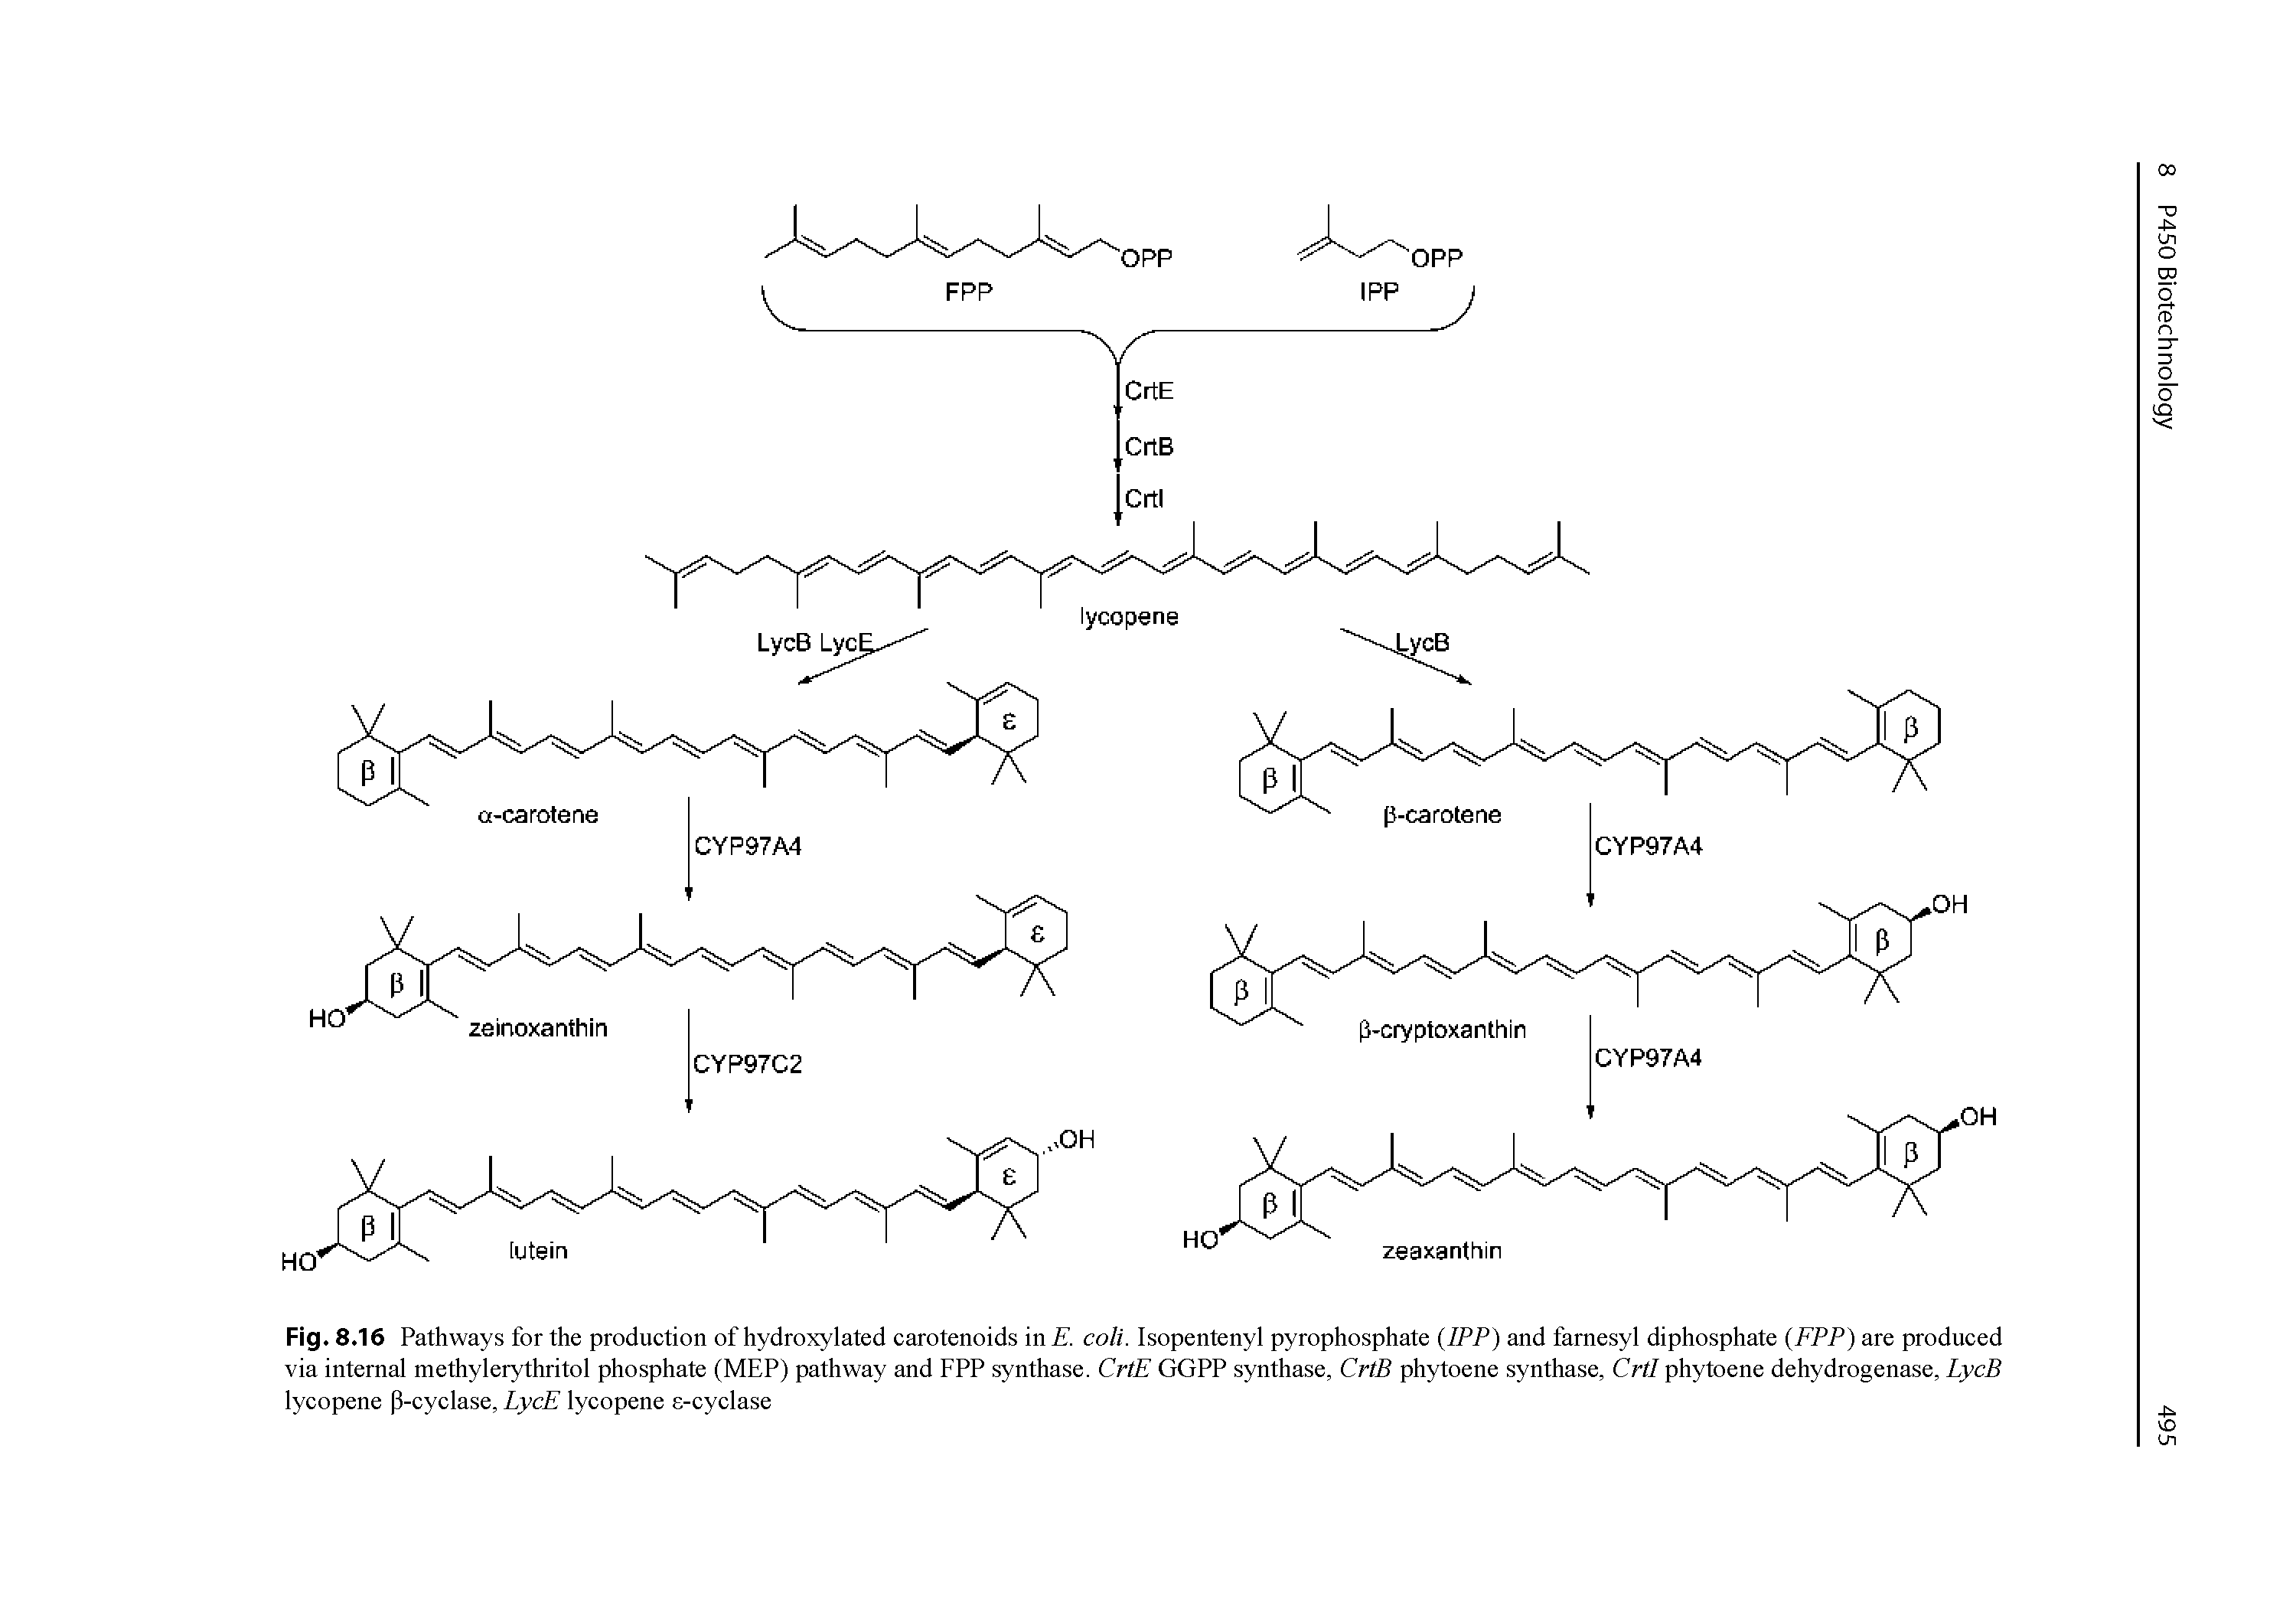 Fig. 8.16 Pathways for the production of hydroxylated carotenoids in . coli. Isopentenyl pyrophosphate (IPP) and farnesyl diphosphate (FPP) are produced via internal methylerythritol phosphate (MEP) pathway and FPP synthase. CrtE GGPP synthase, CrtB phytoene synthase, CrtI phytoene dehydrogenase, LycB lycopene p-cyclase, LycE lycopene e-cyclase...